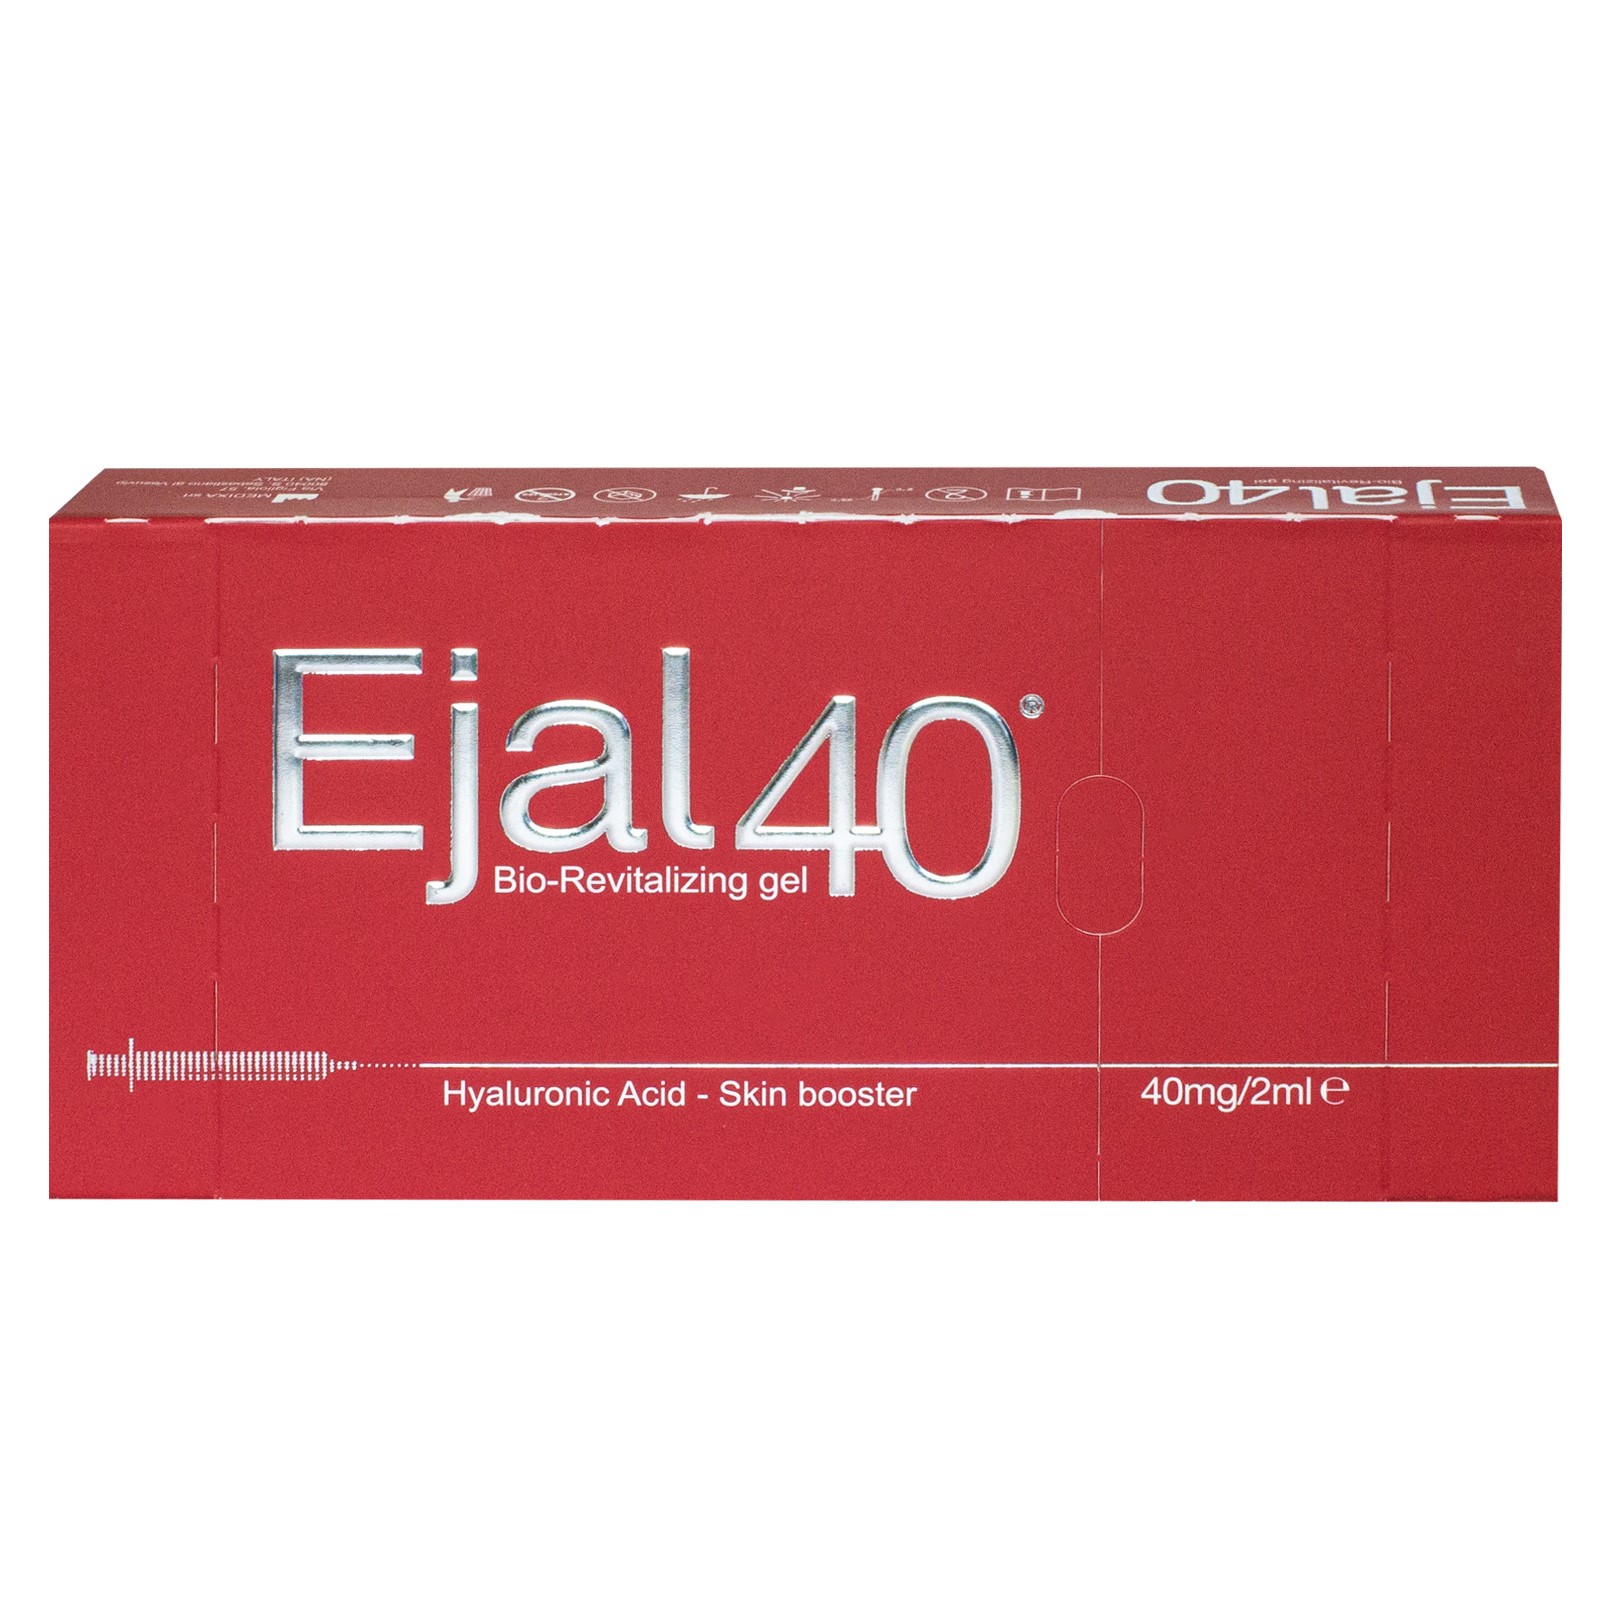 Ejal40 wof front 1